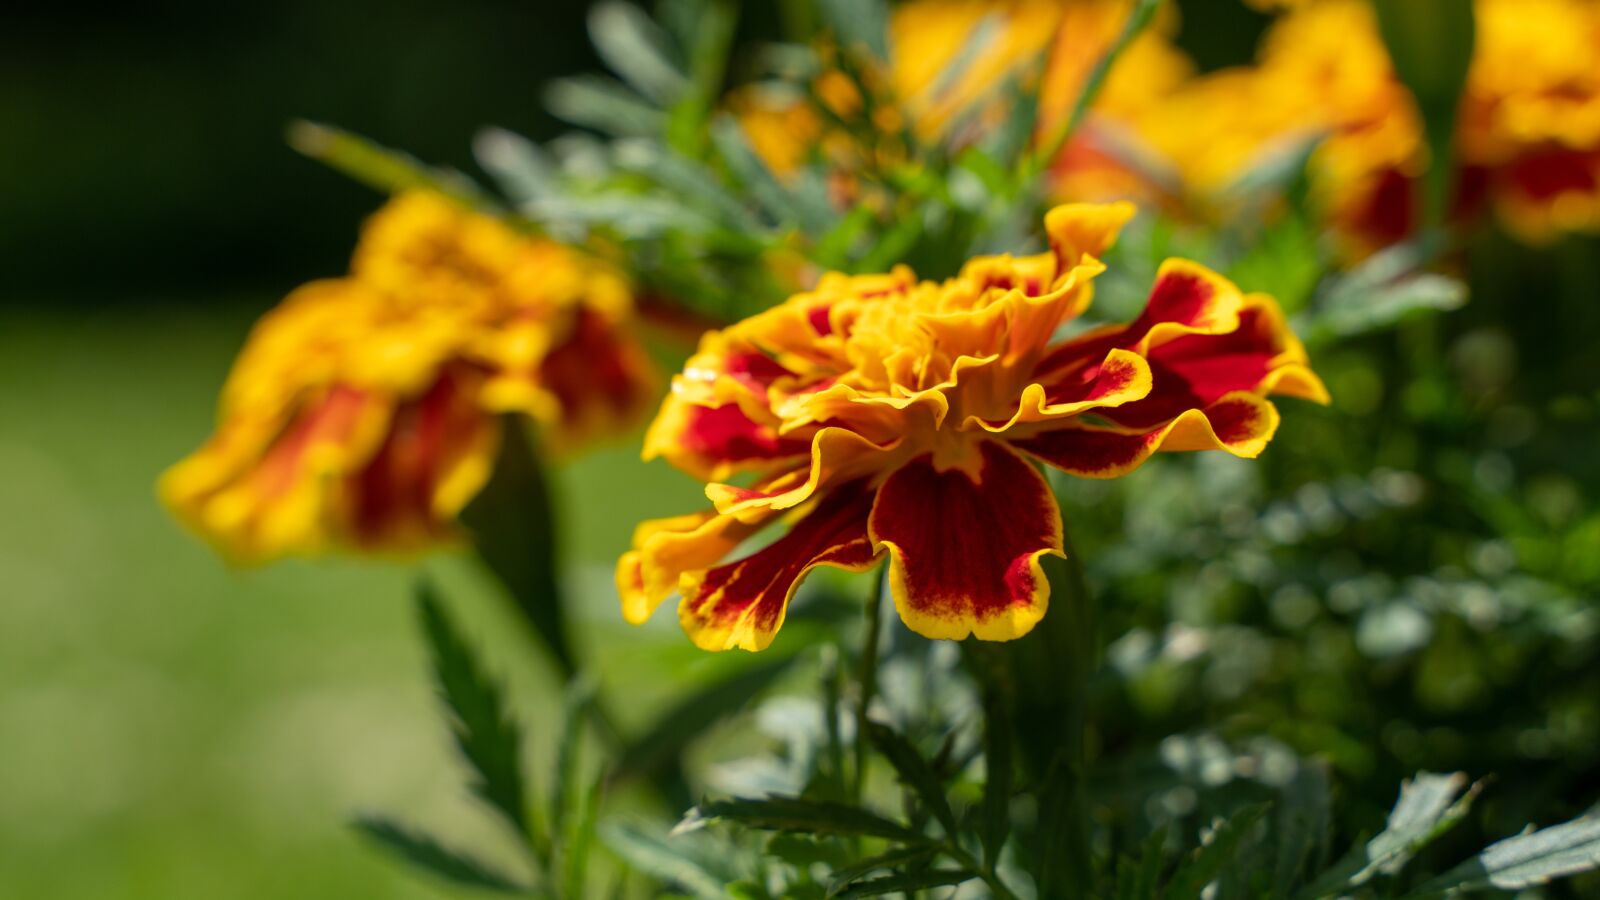 Sony a6300 sample photo. Marigold, plant, bloom photography